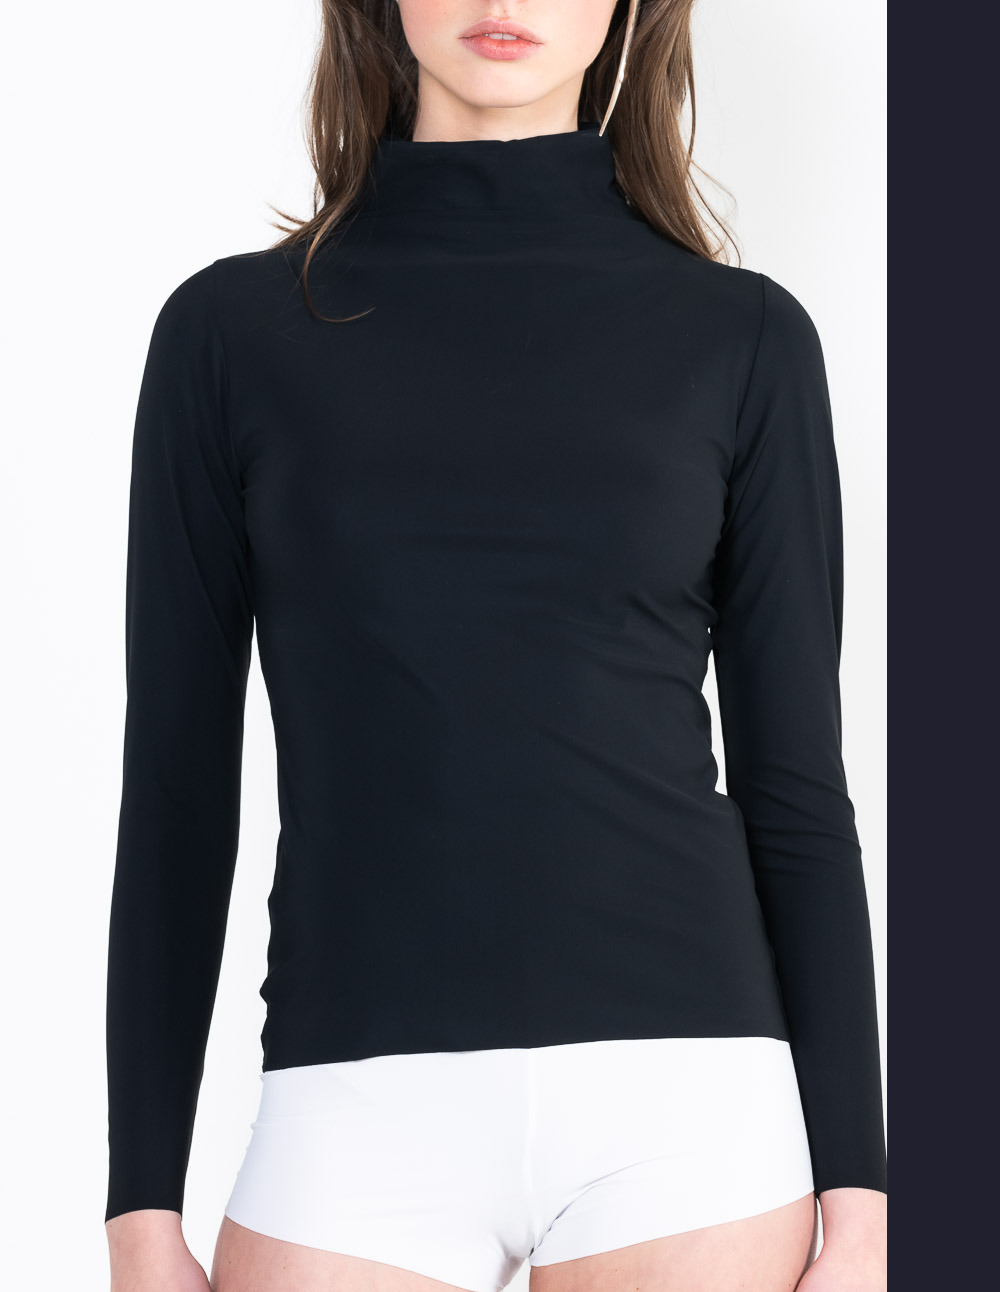 L13 High neck top with long sleeves